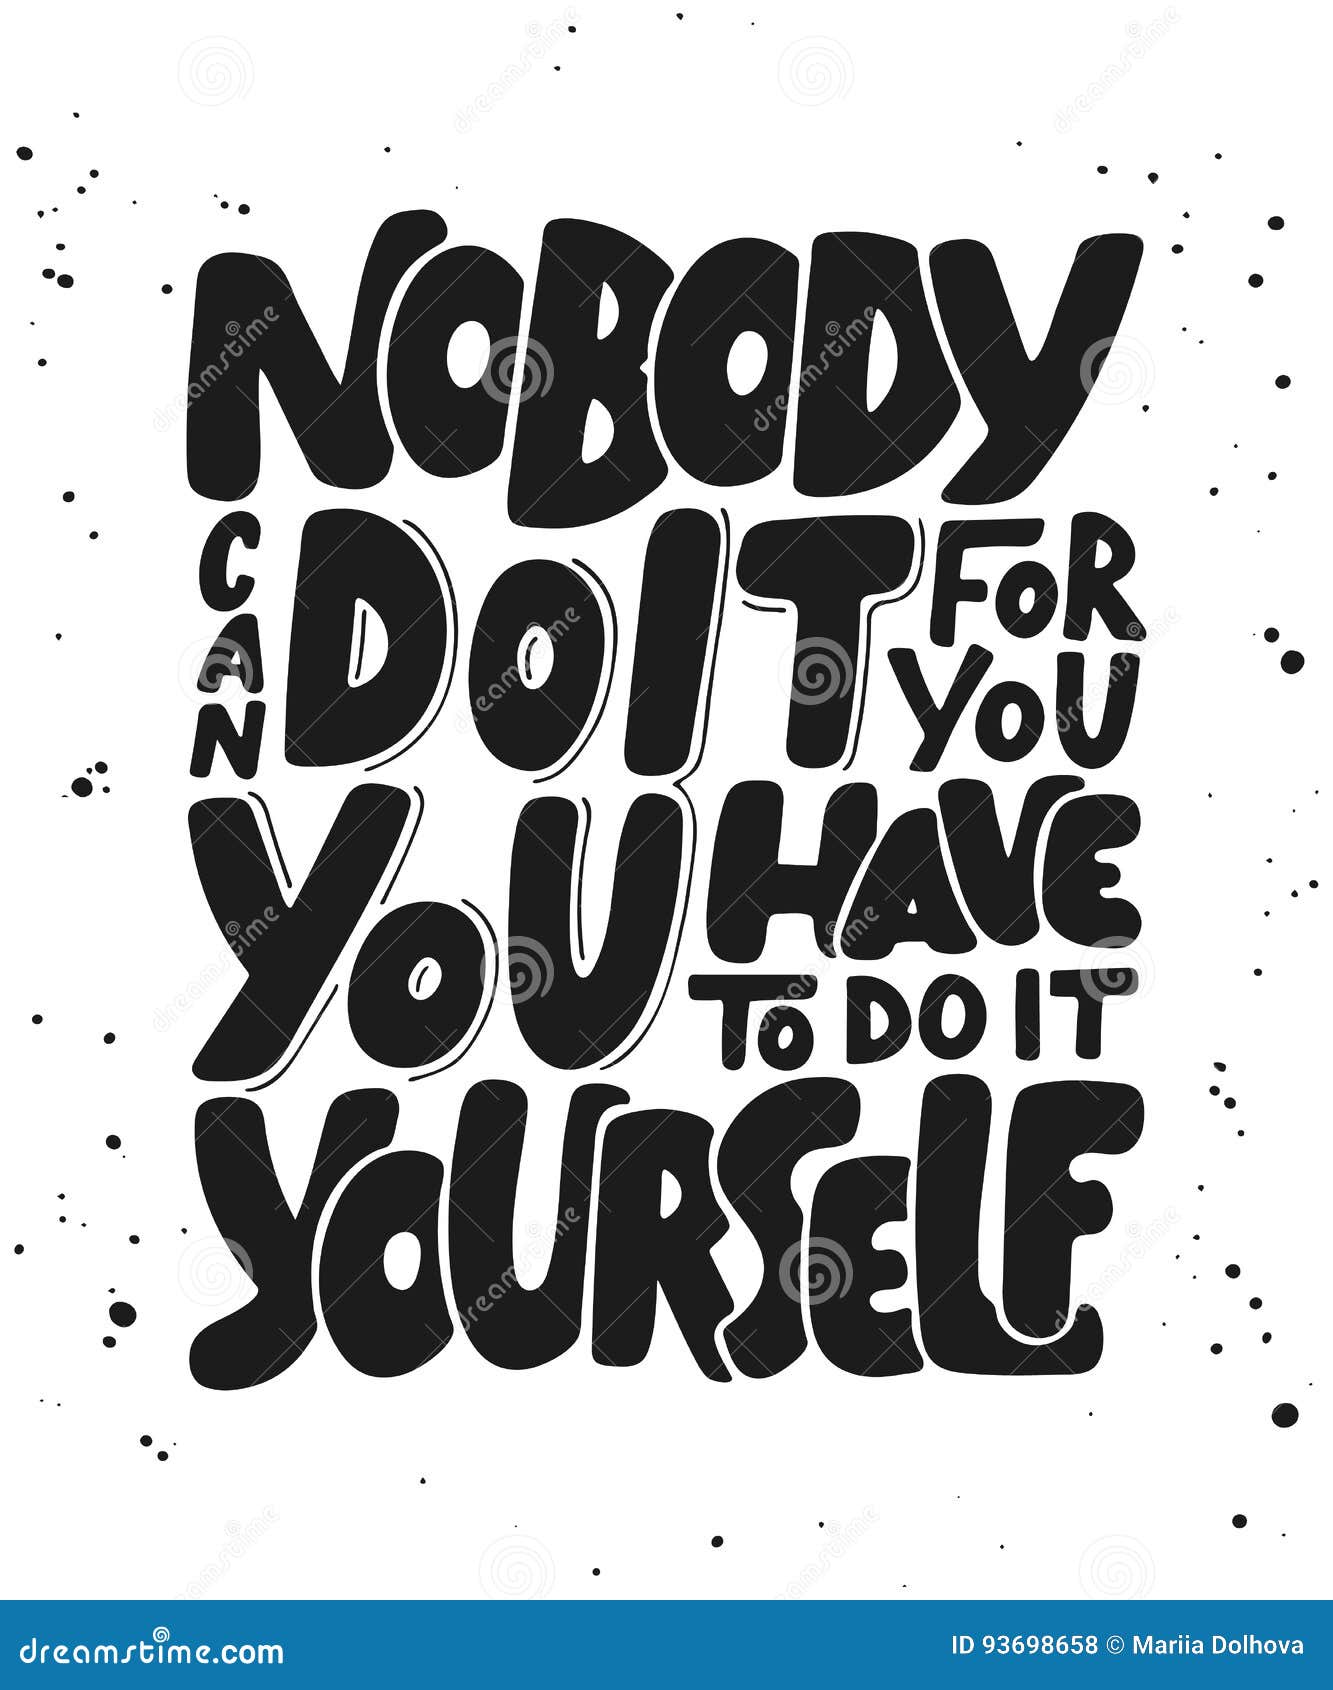 nobody can do it for you, you have to do it yourself.